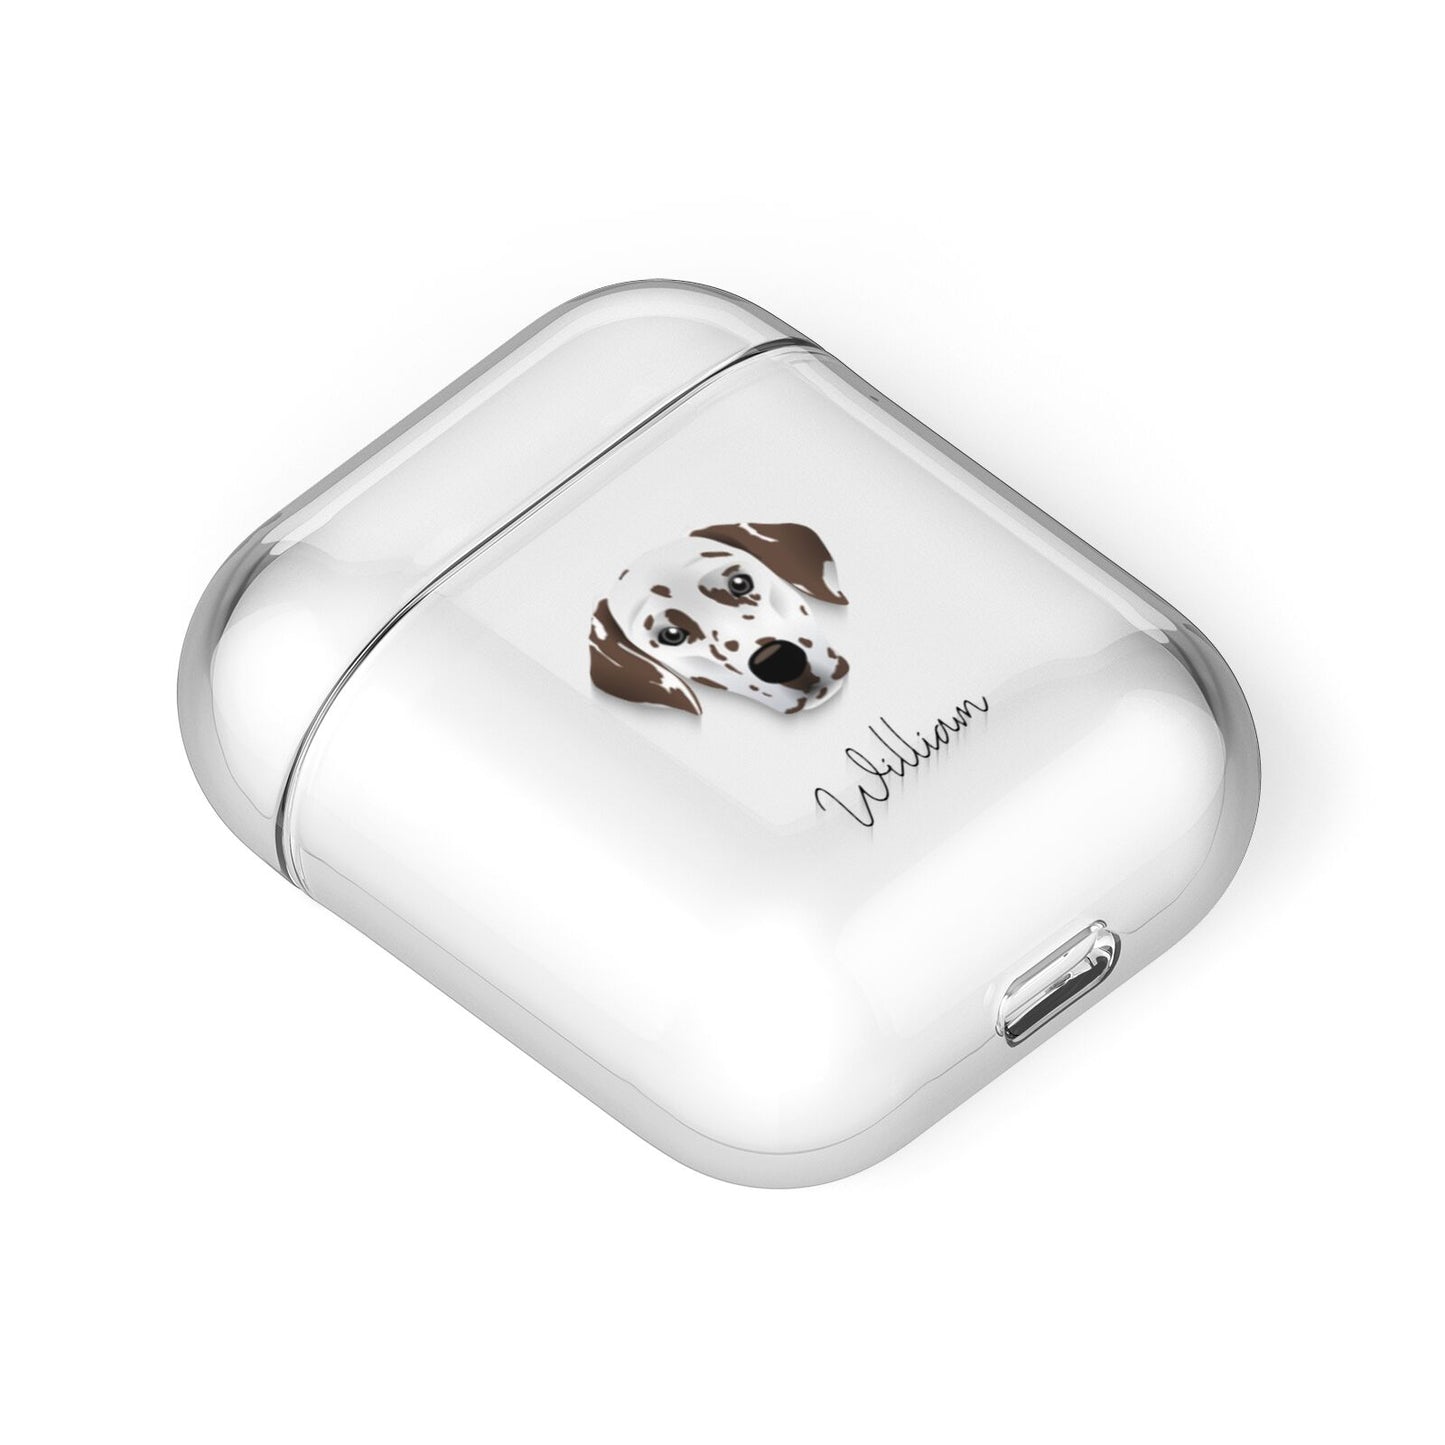 Dalmatian Personalised AirPods Case Laid Flat